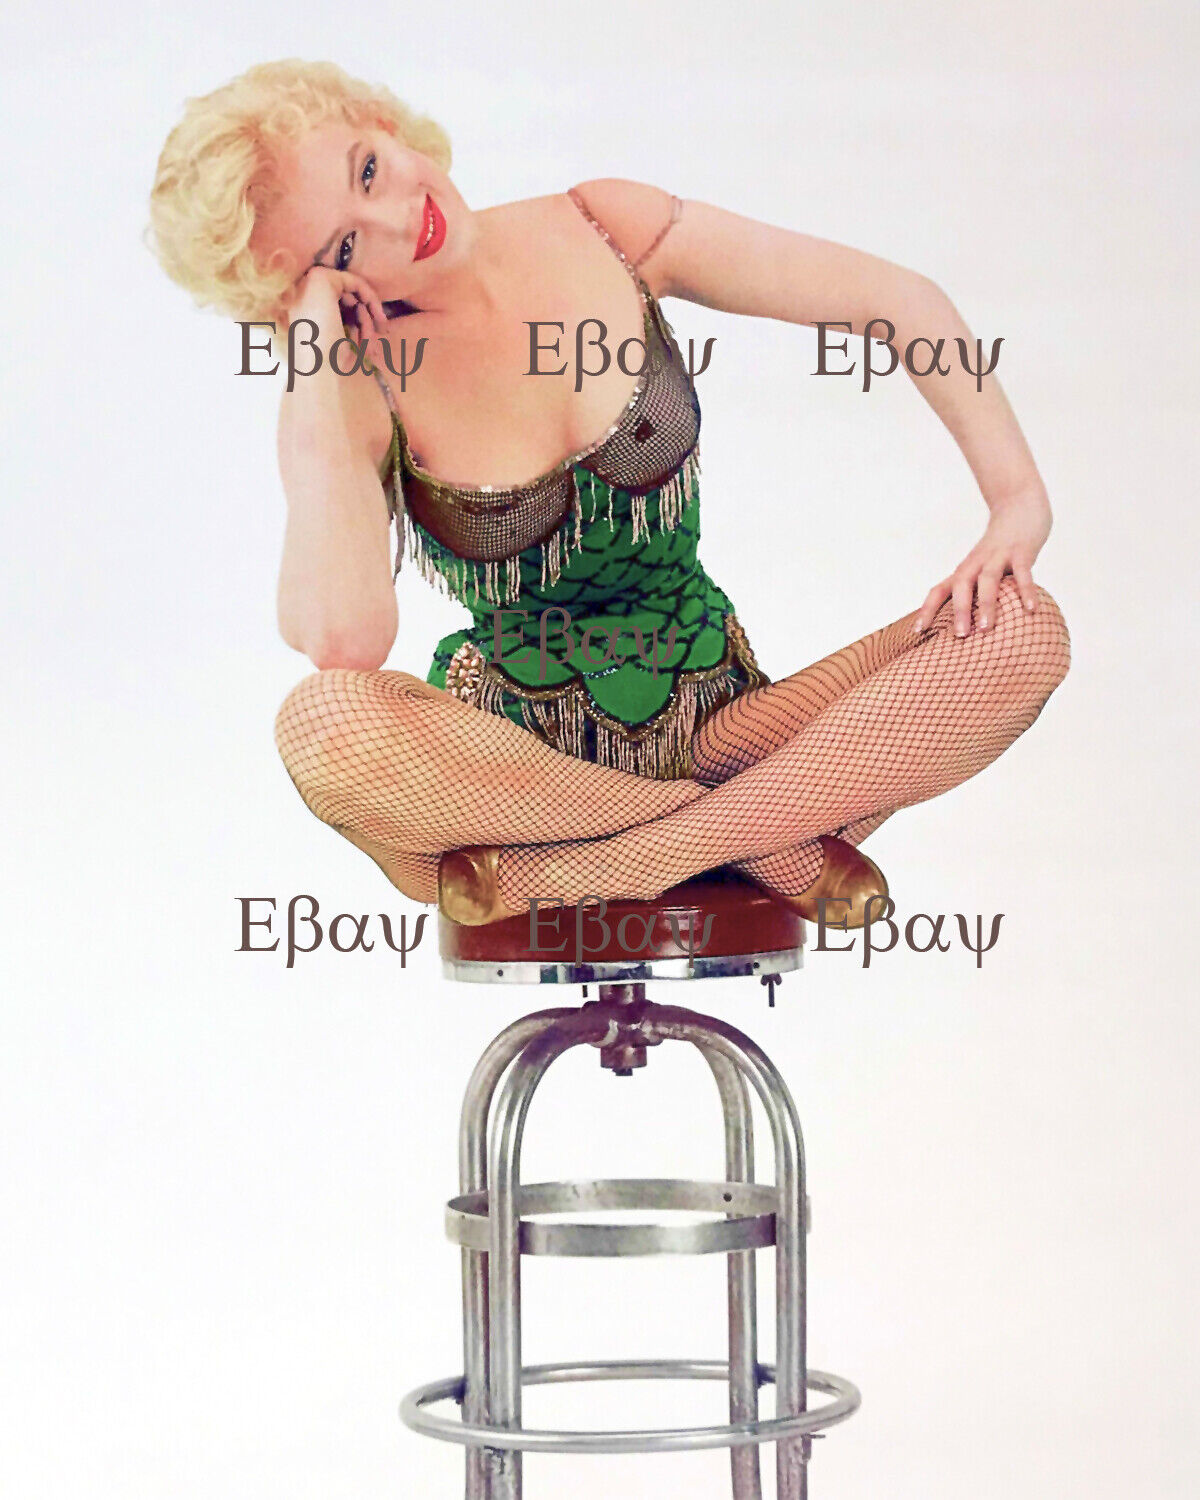 Marilyn Monroe (4)From Movie Bus Stop Actress, Singer, Model  8X10 Photo Reprint